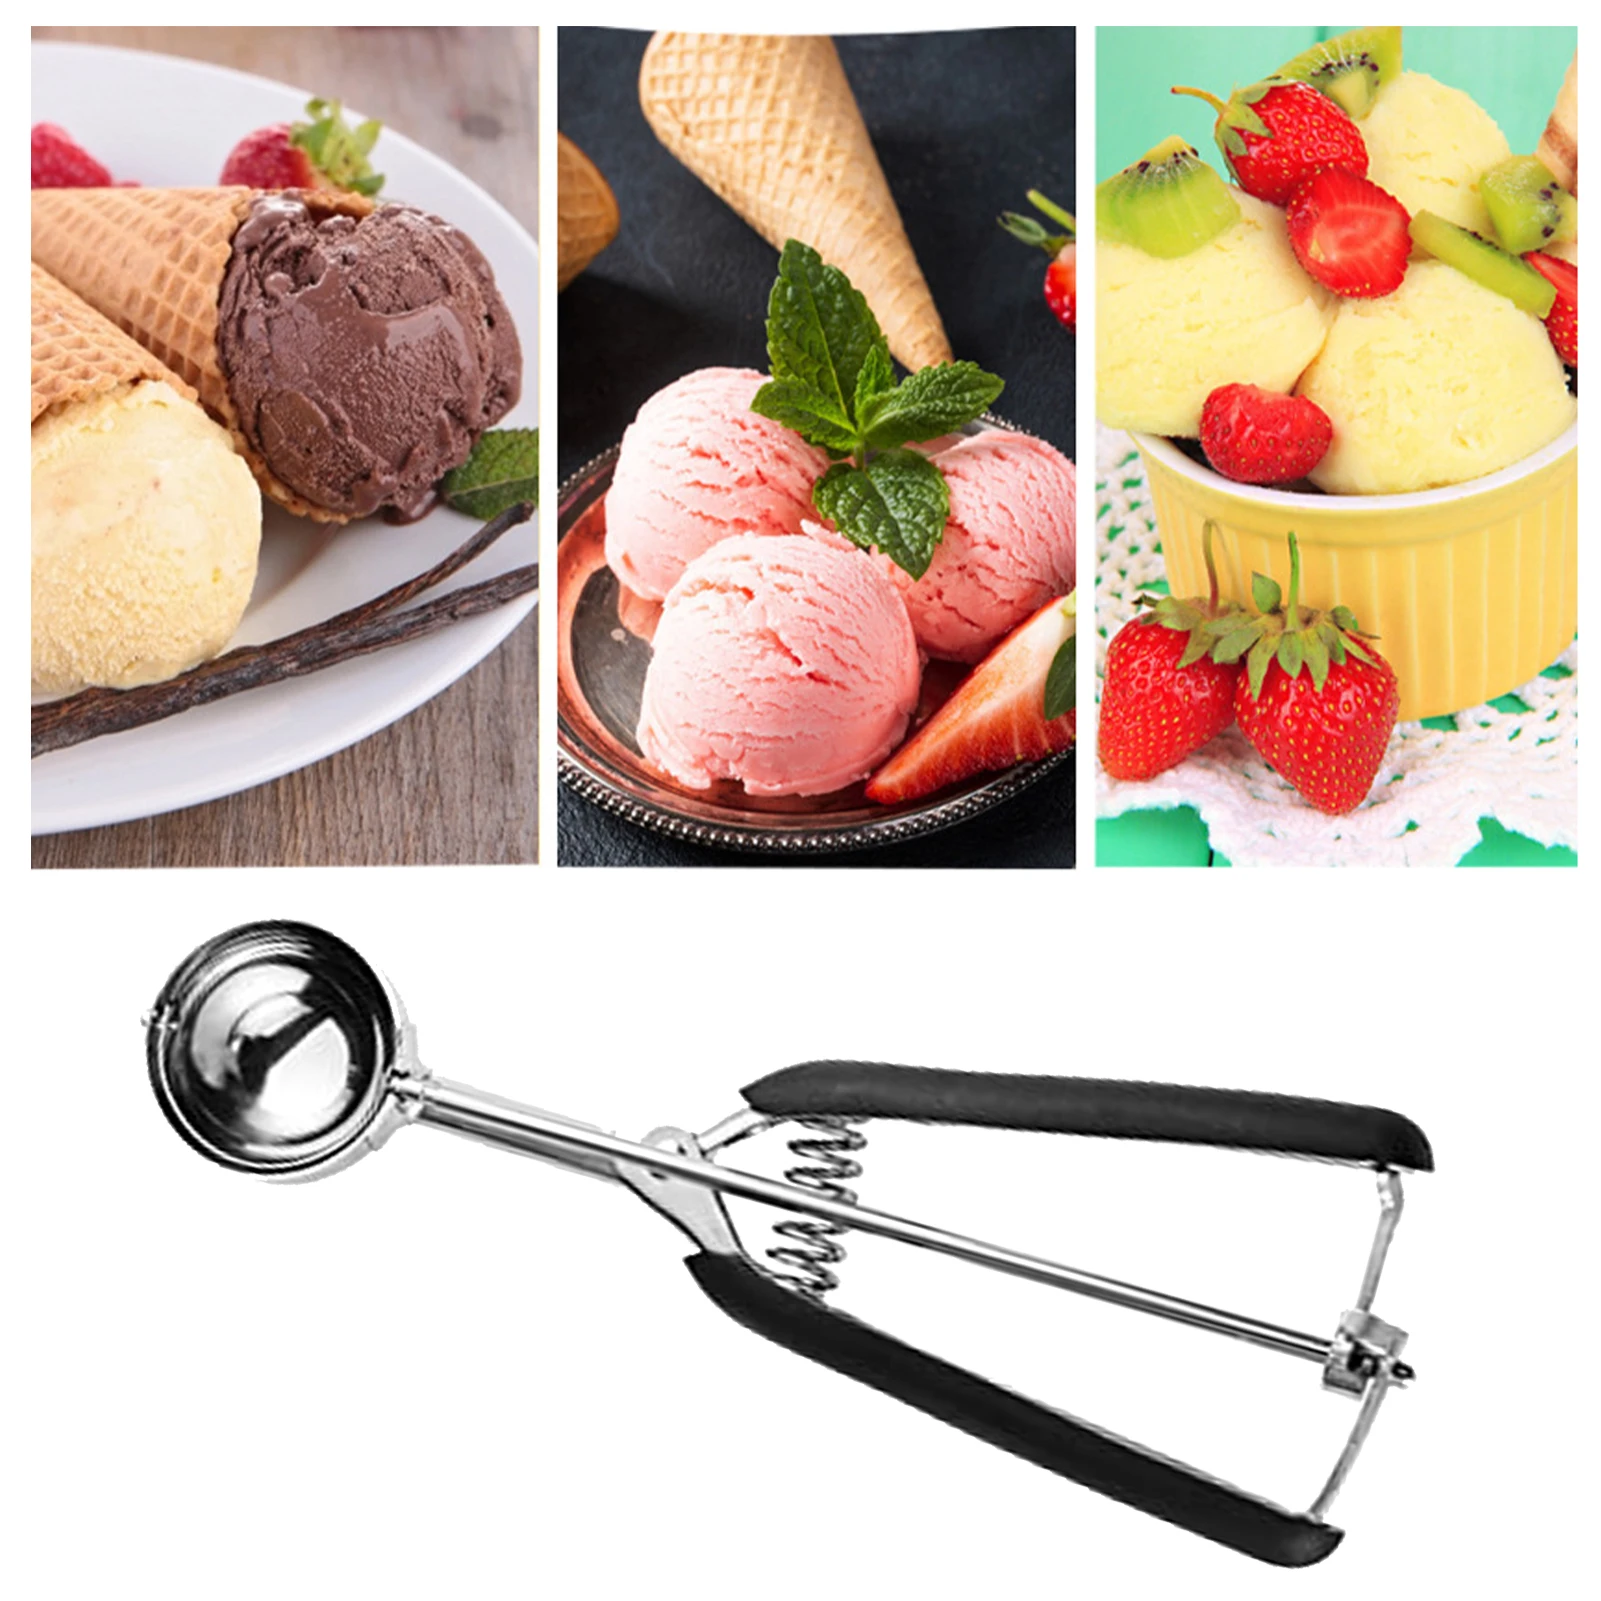 https://ae01.alicdn.com/kf/Se8b34371c55646c09b1fc56b3ab6d4e9u/Cookie-Scoop-Kitchen-Tool-Cupcake-Spring-Loaded-1-Tablespoon-For-Baking-Ice-Cream-Stainless-Steel-Home.jpg